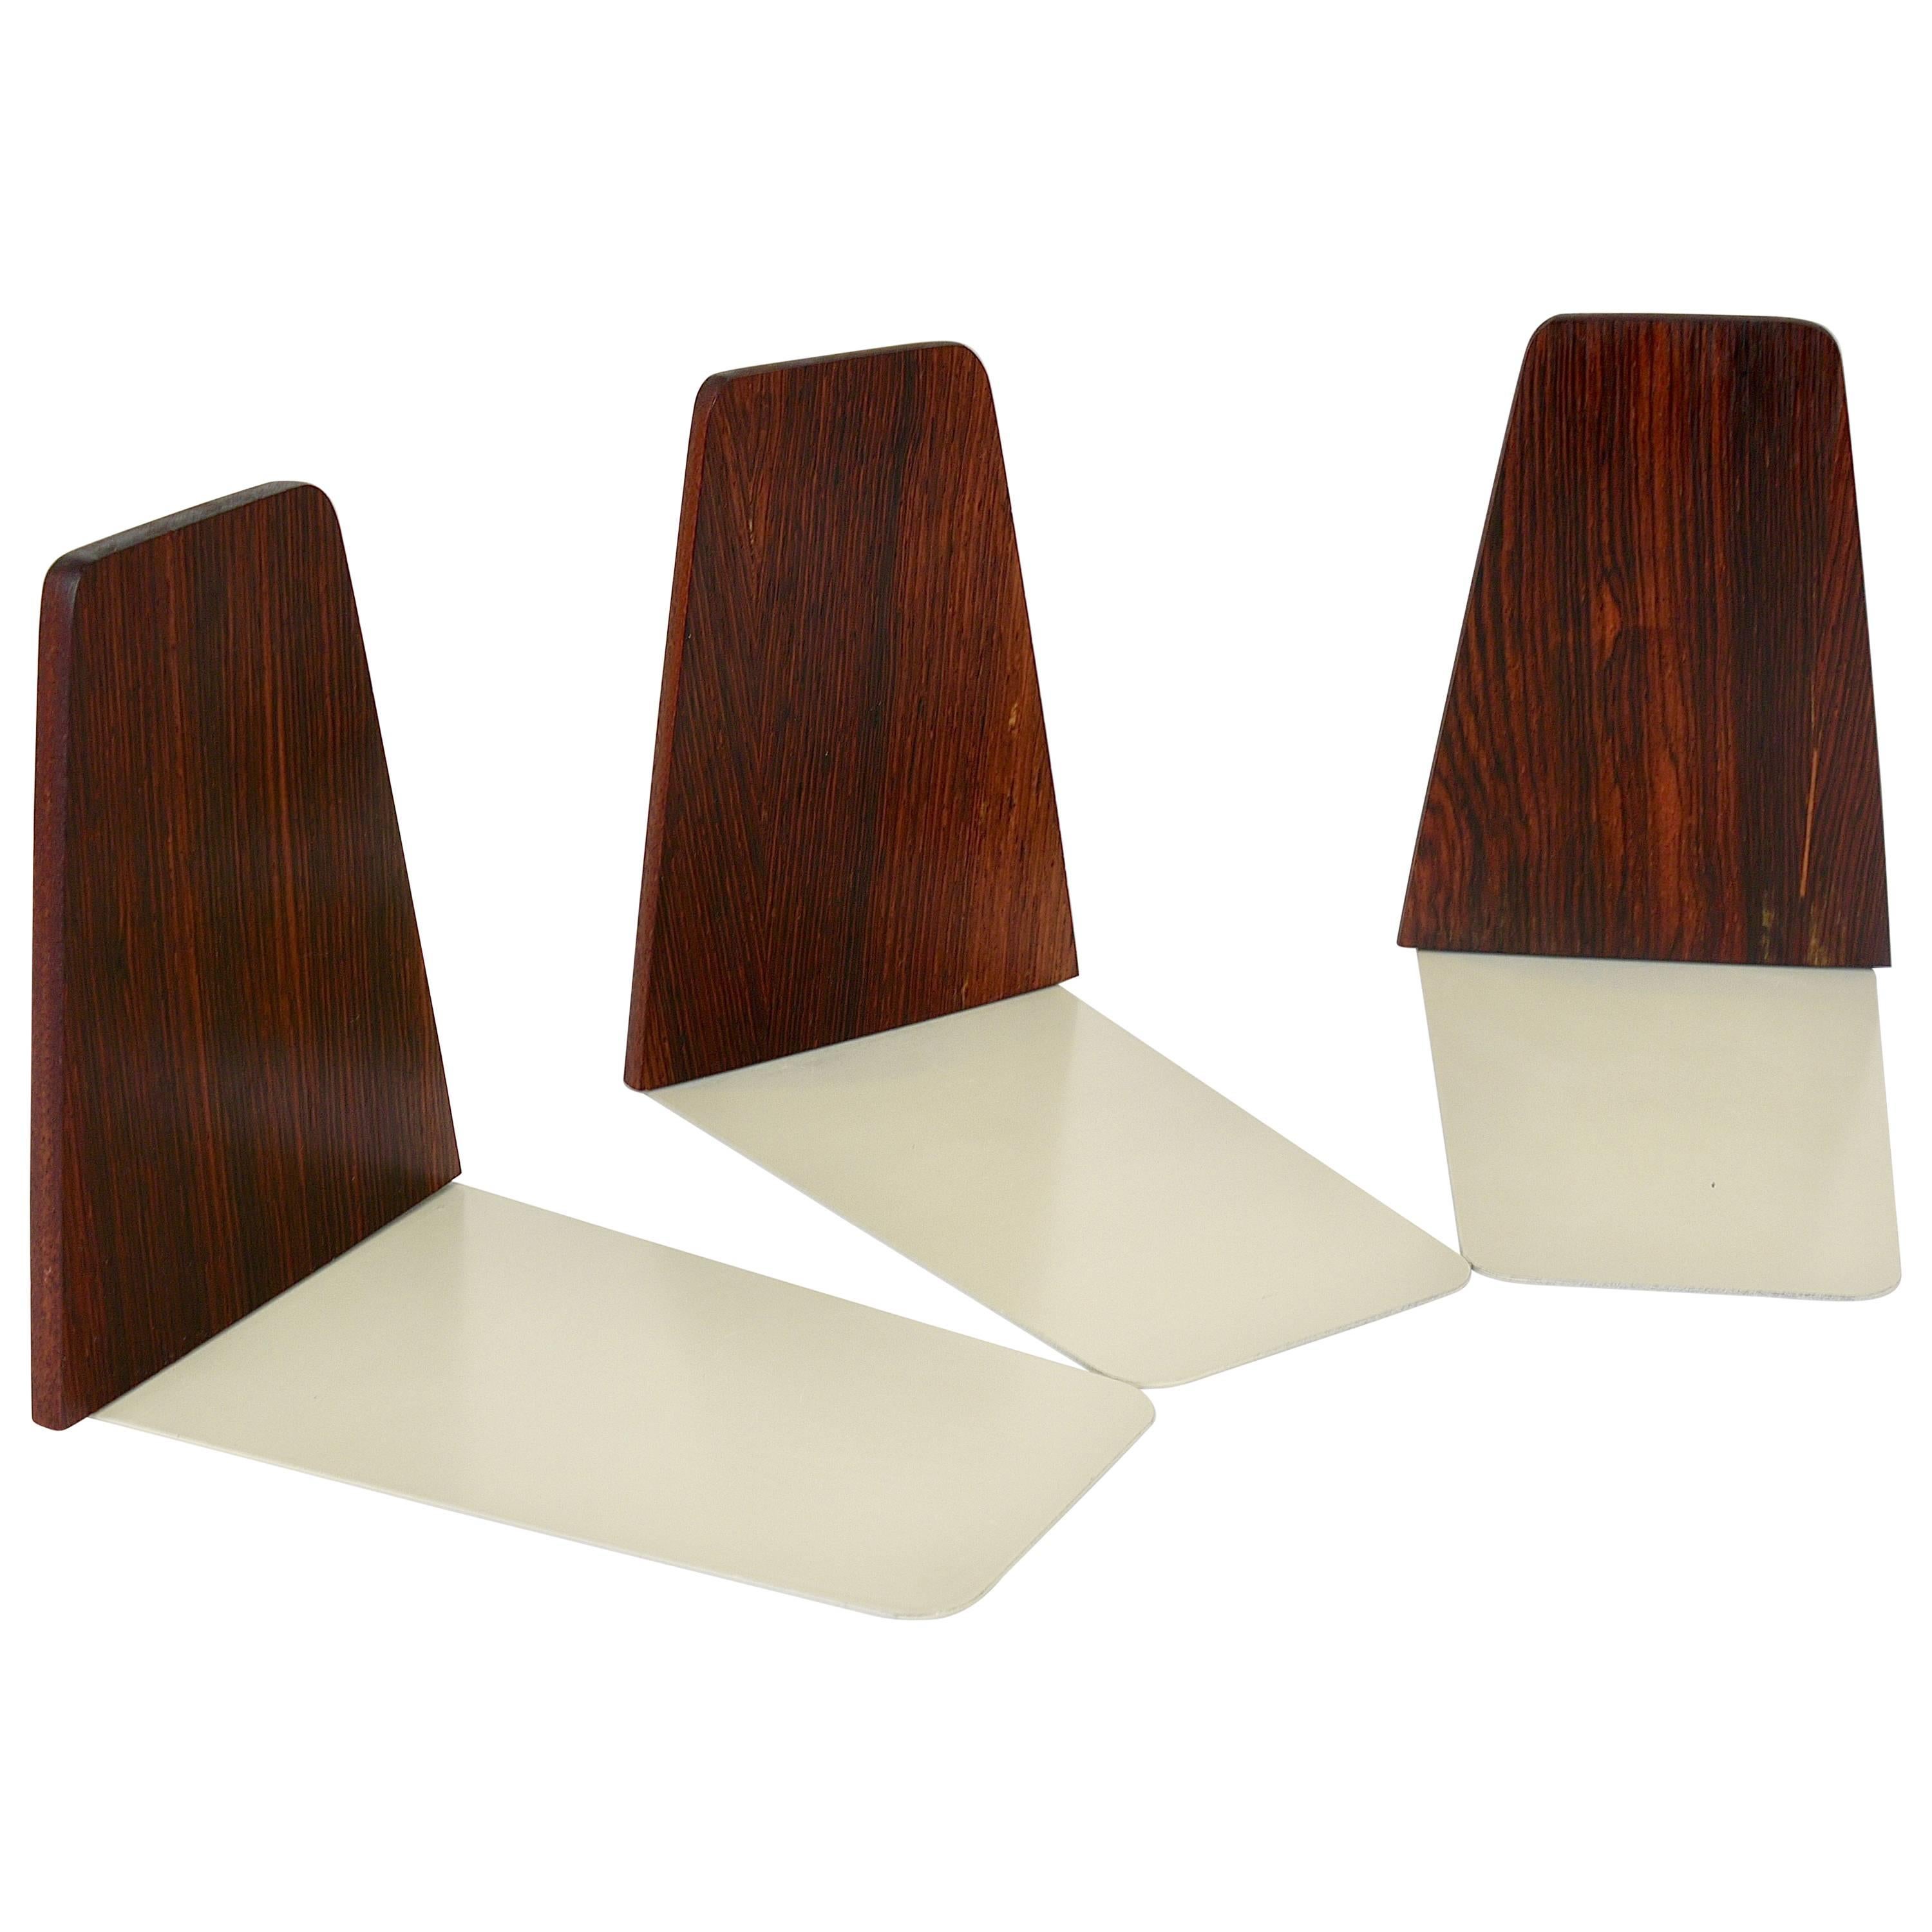 Three Danish Modern Rosewood and Metal Book Ends, Denmark, 1960s